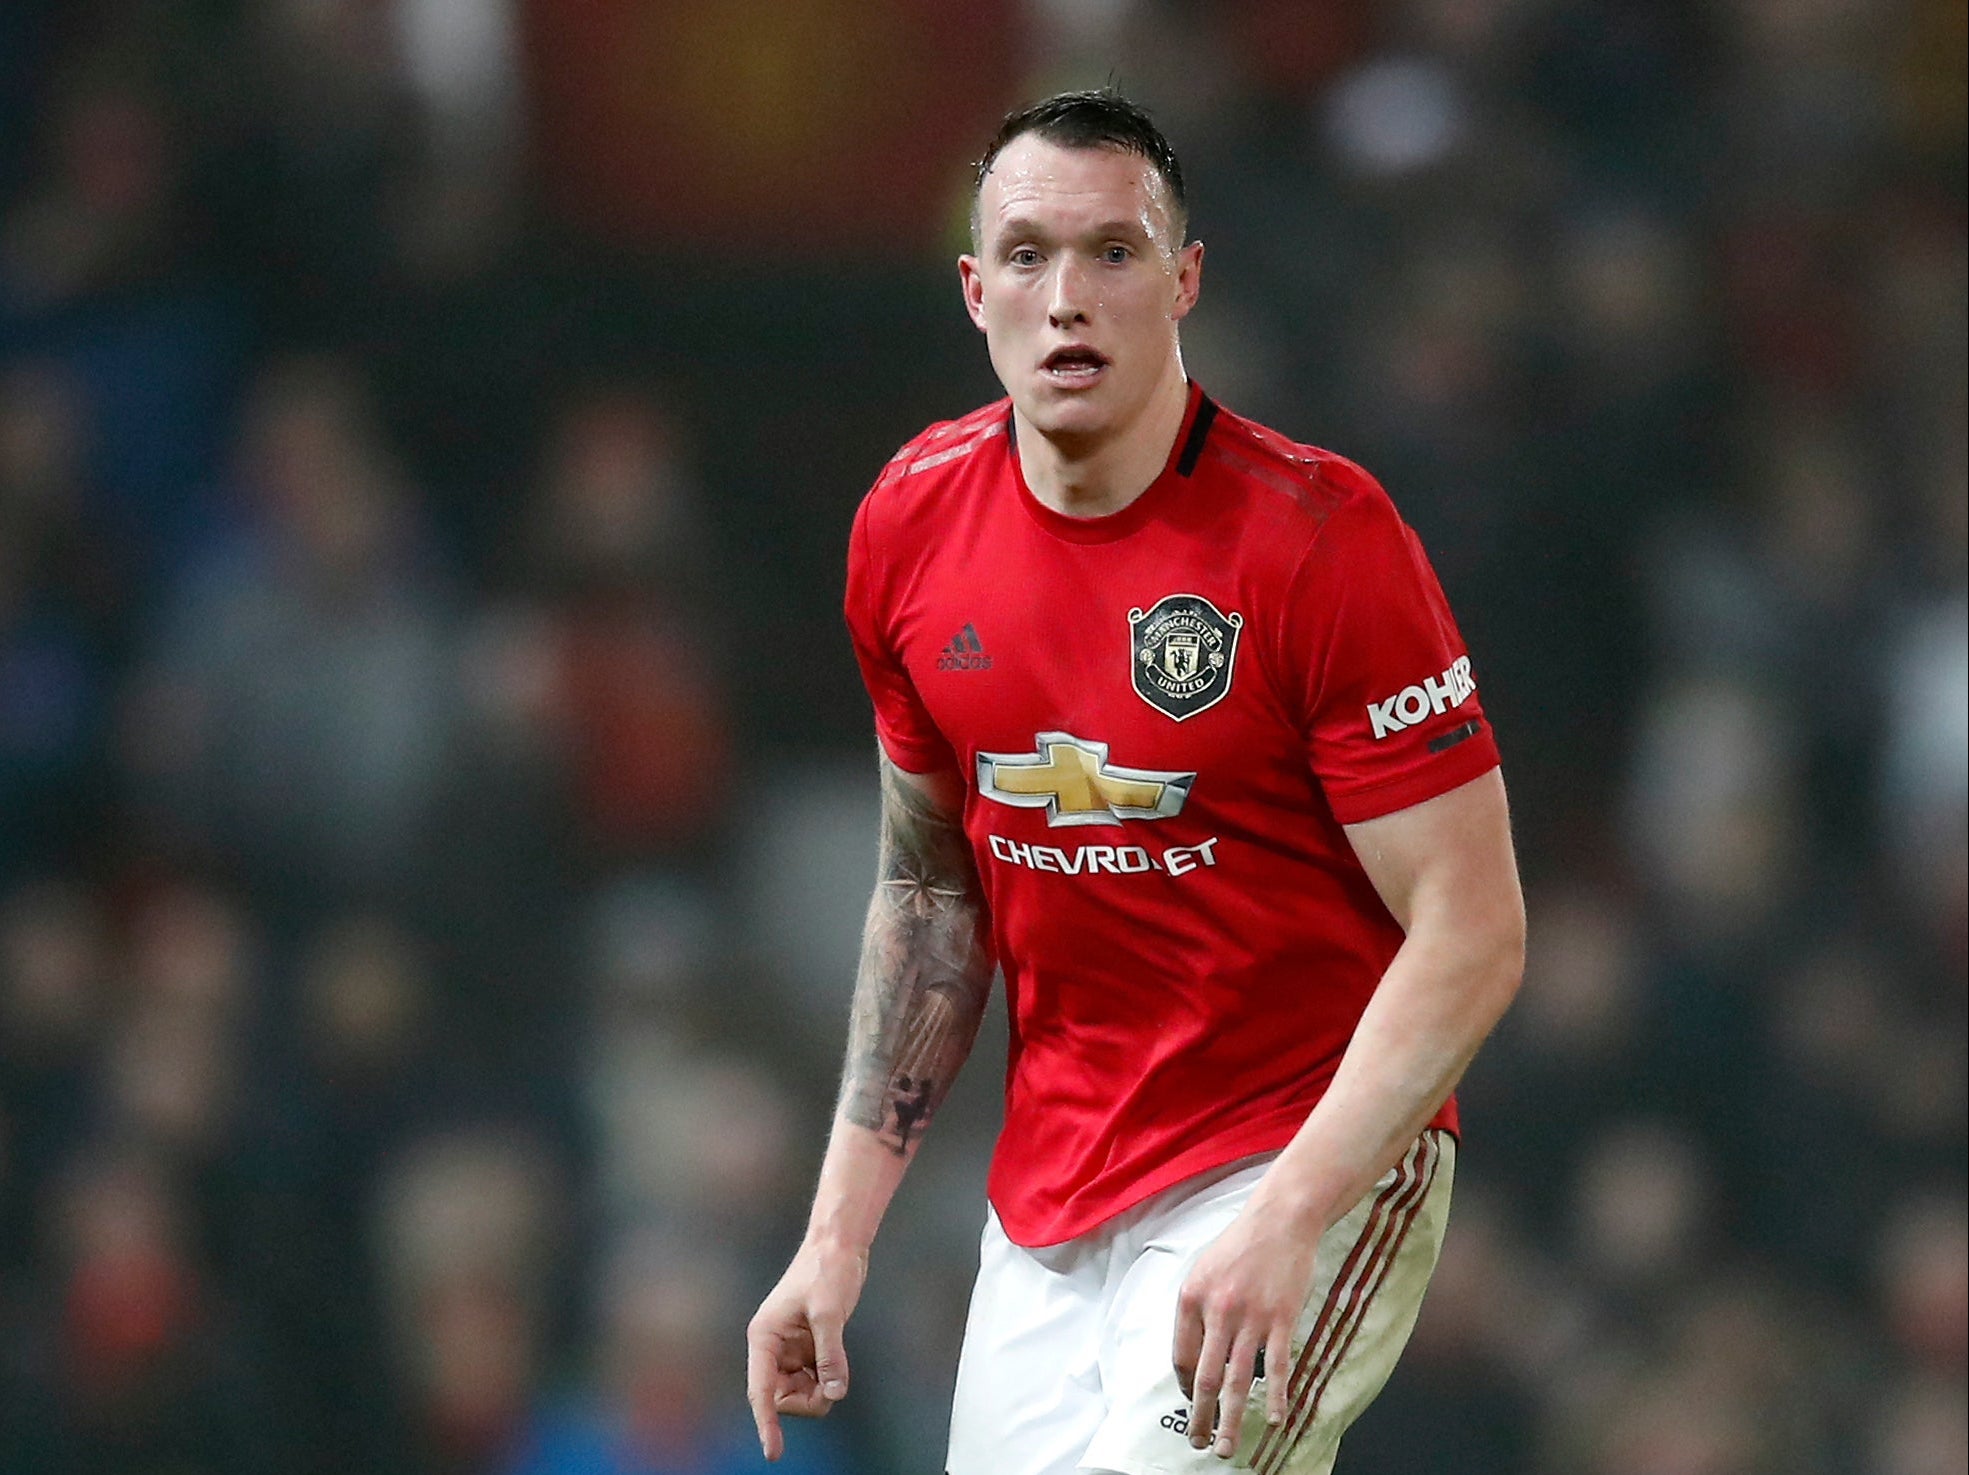 Manchester United defender Phil Jones has not played since January 2020